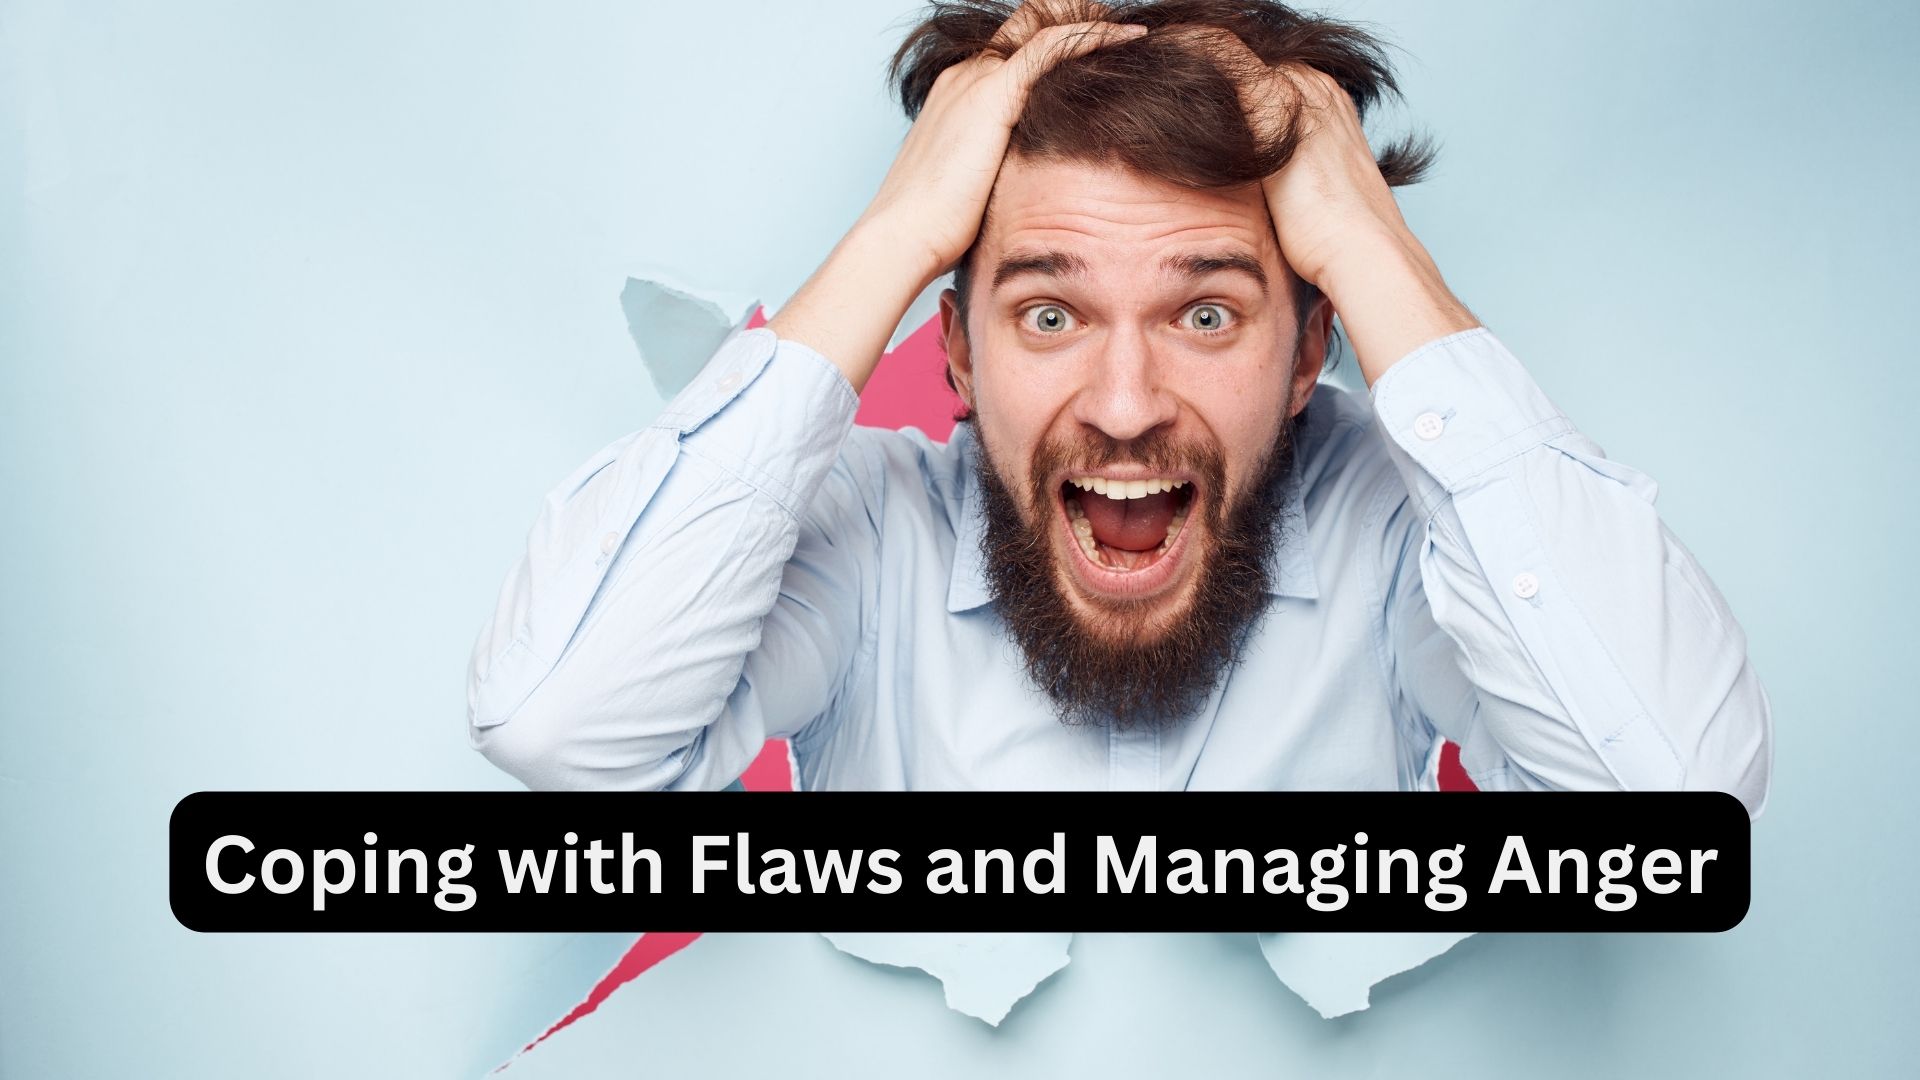 Coping with Flaws and Managing Anger